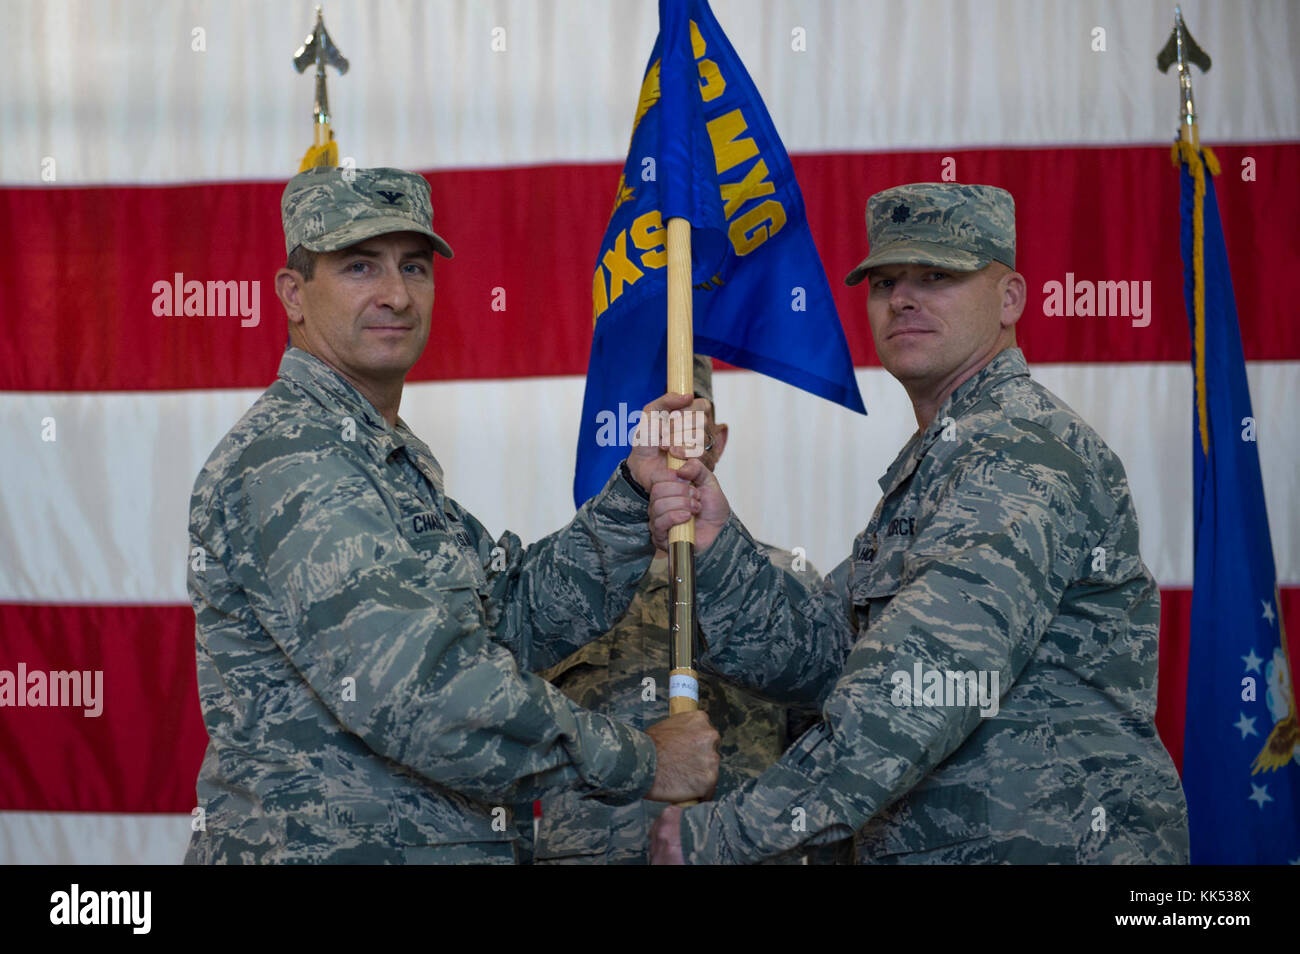 Col. John Chastain III, 23d Maintenance Group commander, left, presents Lt. Col. Neal Van Houten, 23d Maintenance Squadron commander, with the 23d MXS guidon during a re-designation ceremony, Nov. 9, 2017, at Moody Air Force Base, Ga. Van Houten took command of Air Combat Command’s second largest squadron, leading the 800 men and women who are responsible for executing safe and reliable maintenance on aircraft systems, ground equipment and munitions to support the 23d Wing's attack and rescue missions. (U.S. Air Force photo by Senior Airman Greg Nash) Stock Photo